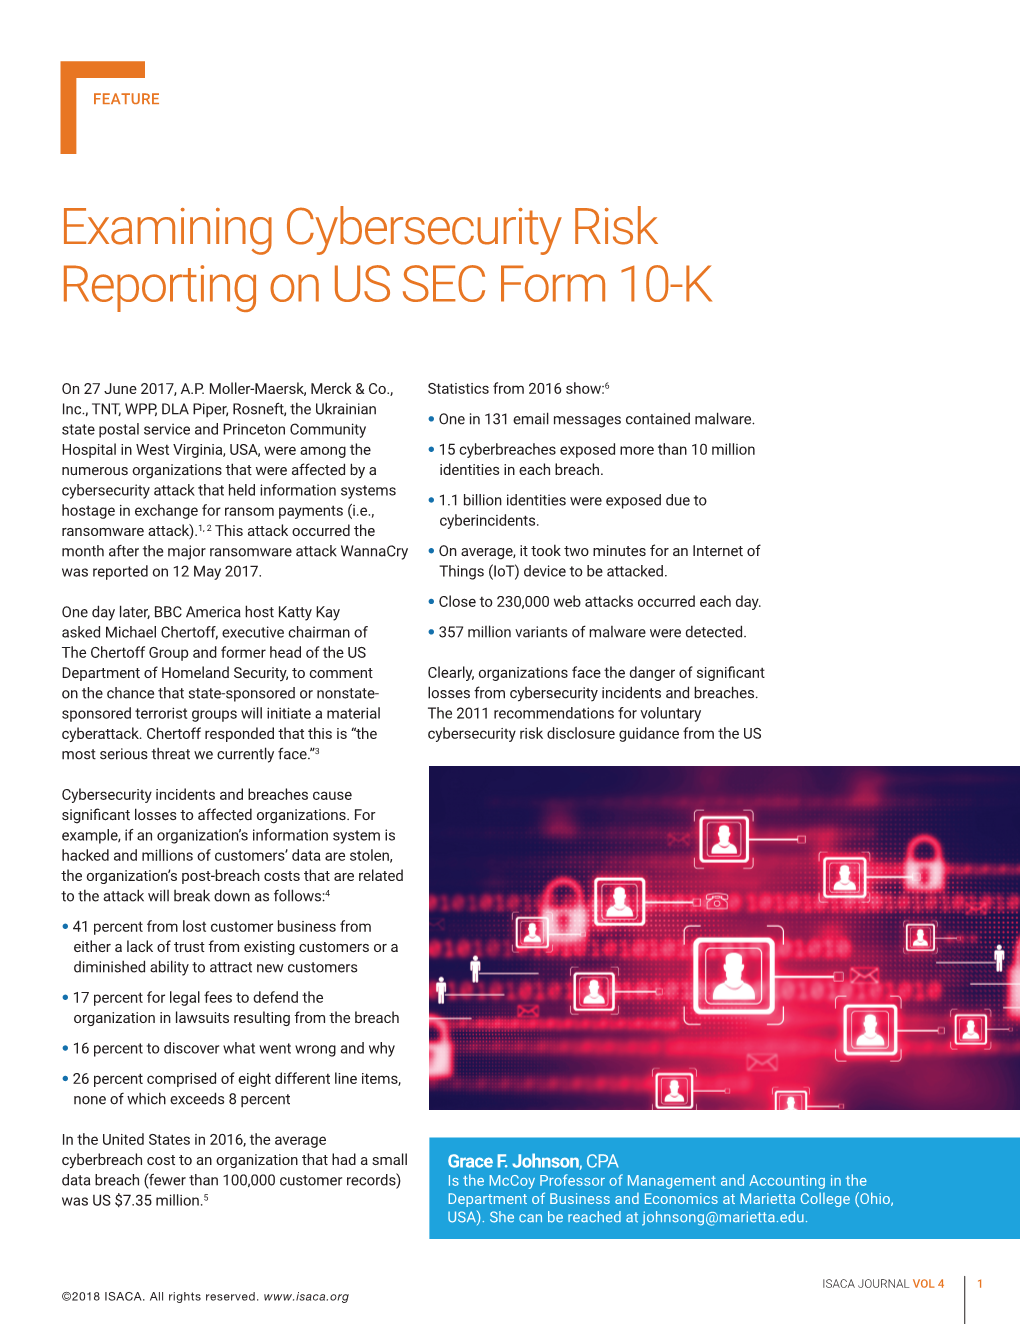 Examining Cybersecurity Risk Reporting on US SEC Form 10-K